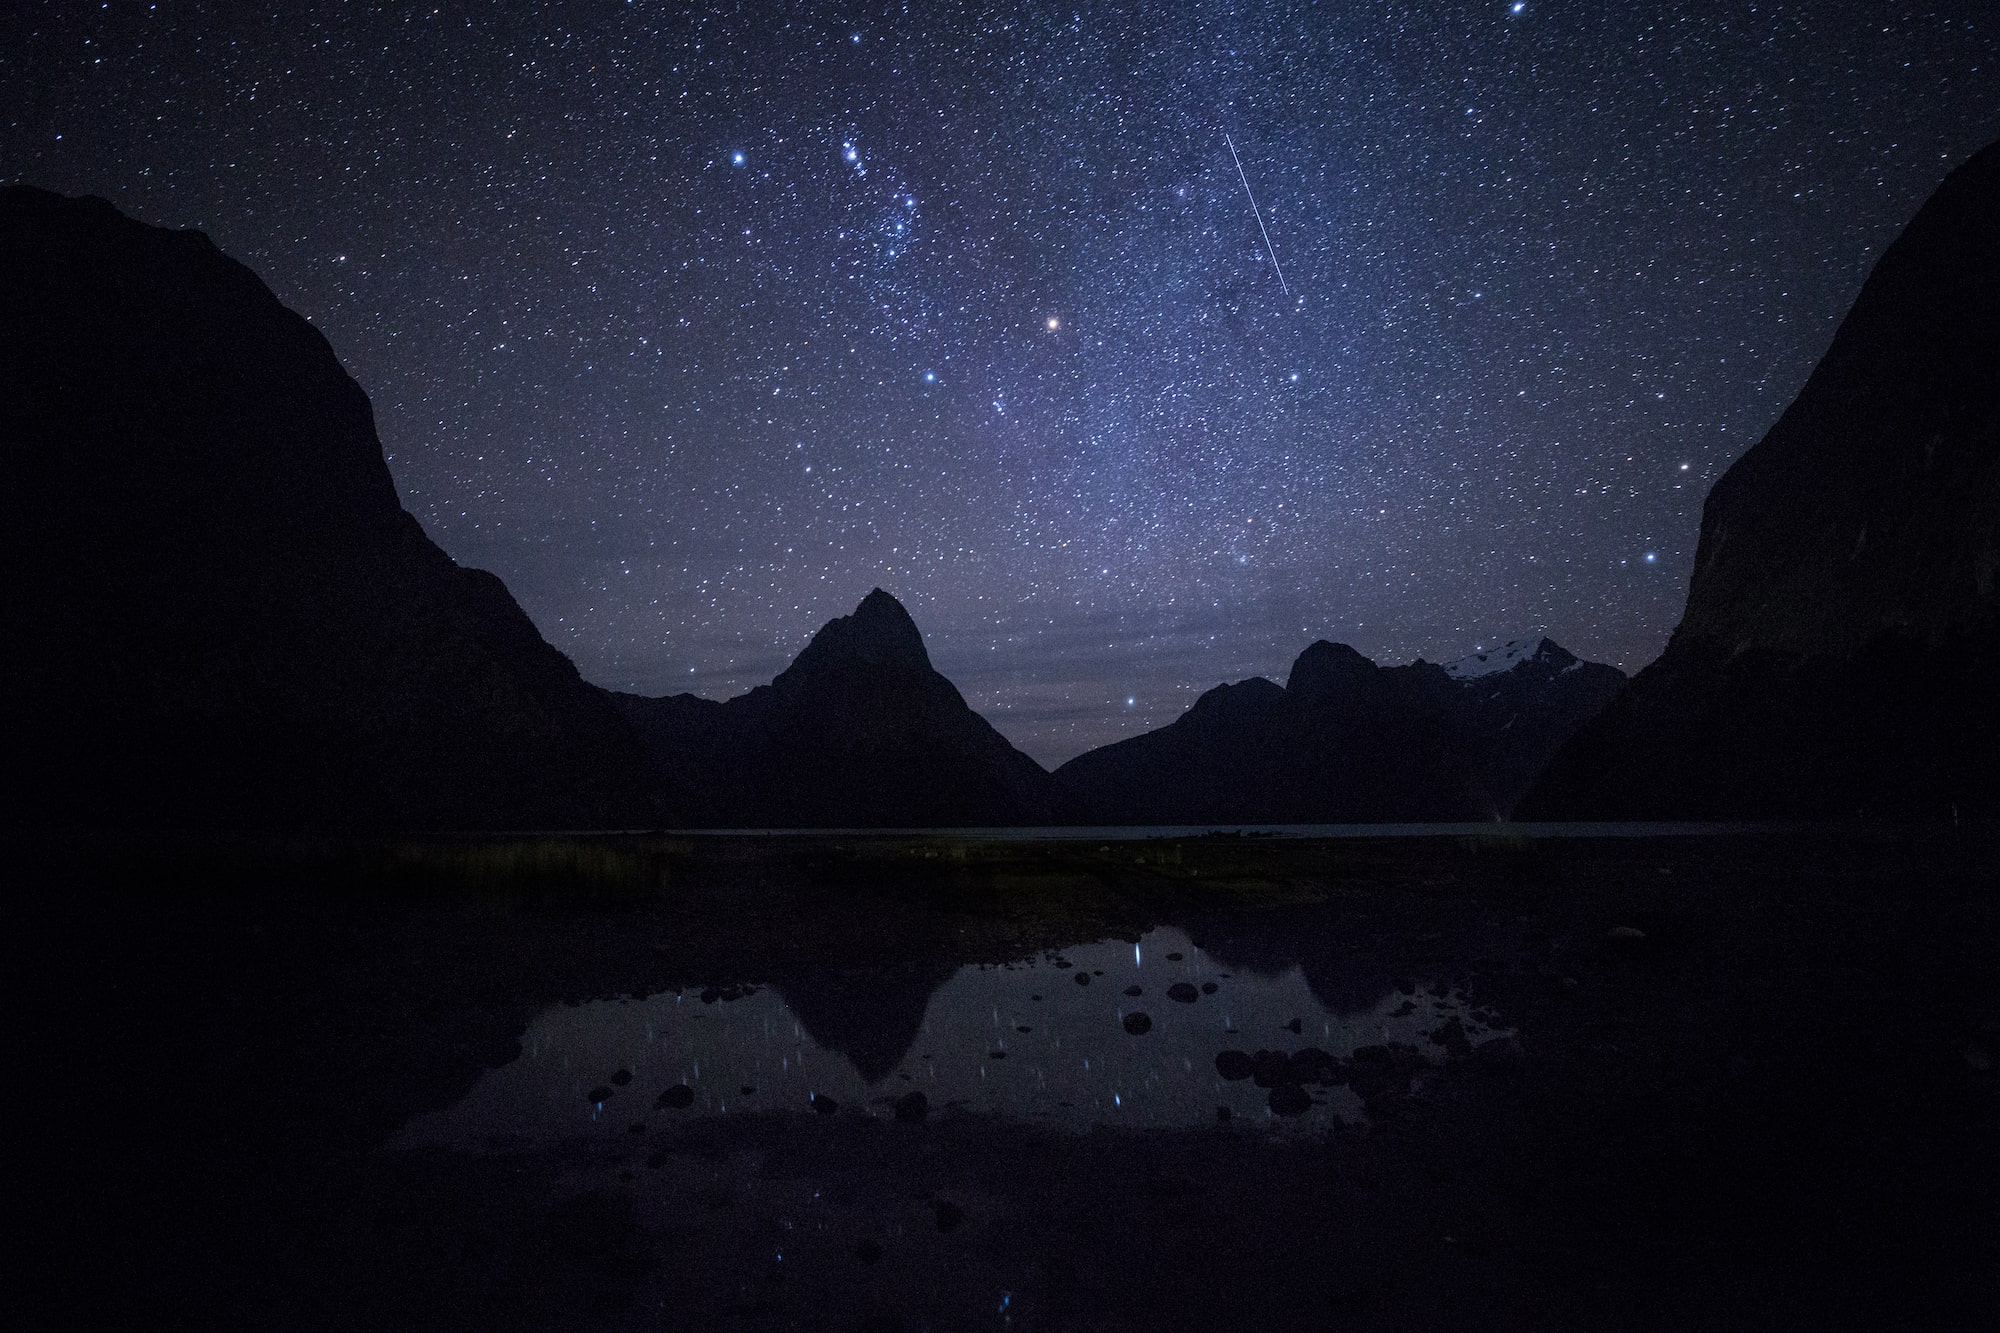 A dramatic starry night at Milford Sound, with the shadow of the mountains reflected in the water